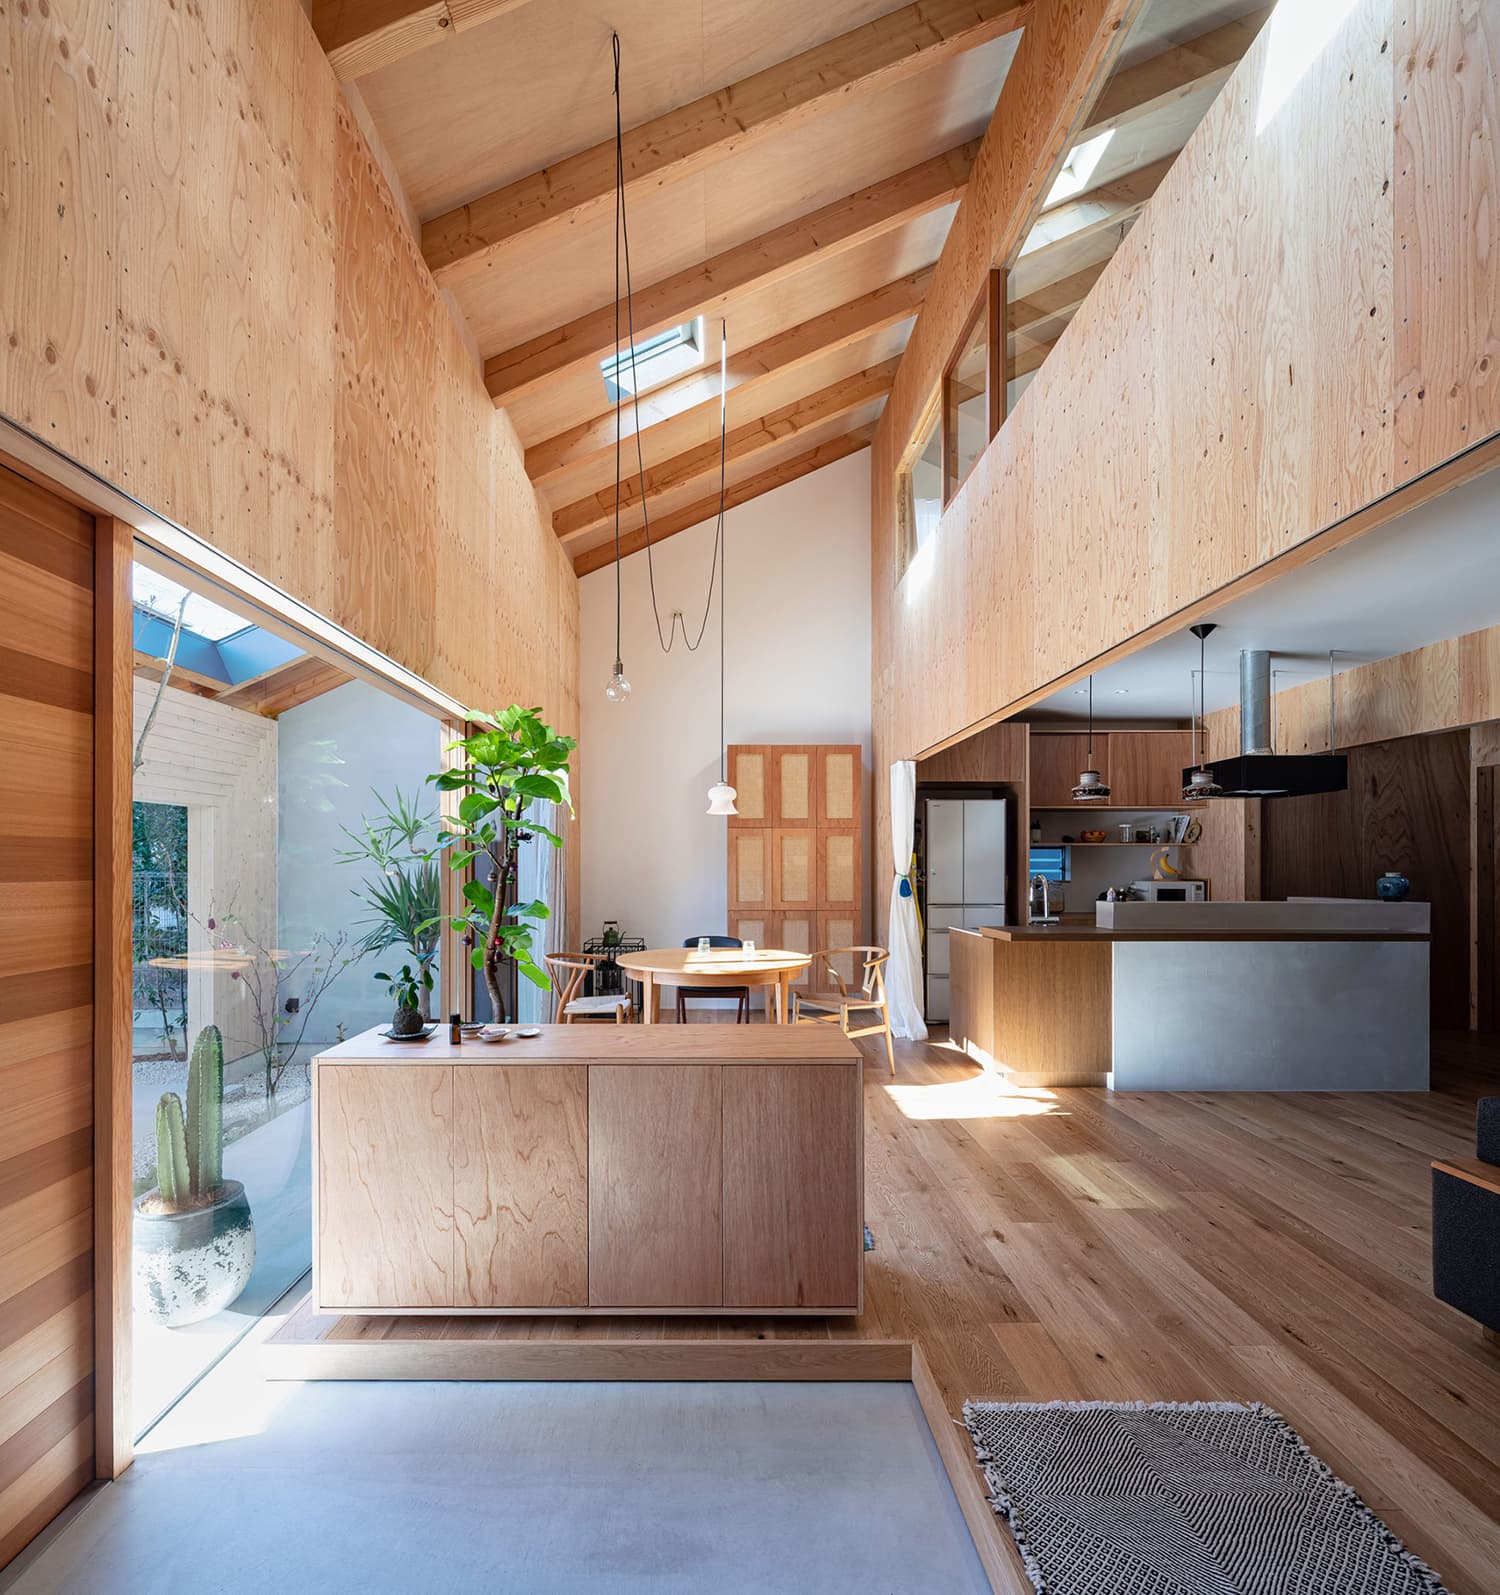 Living area overlooking the outside of a typical Japanese house